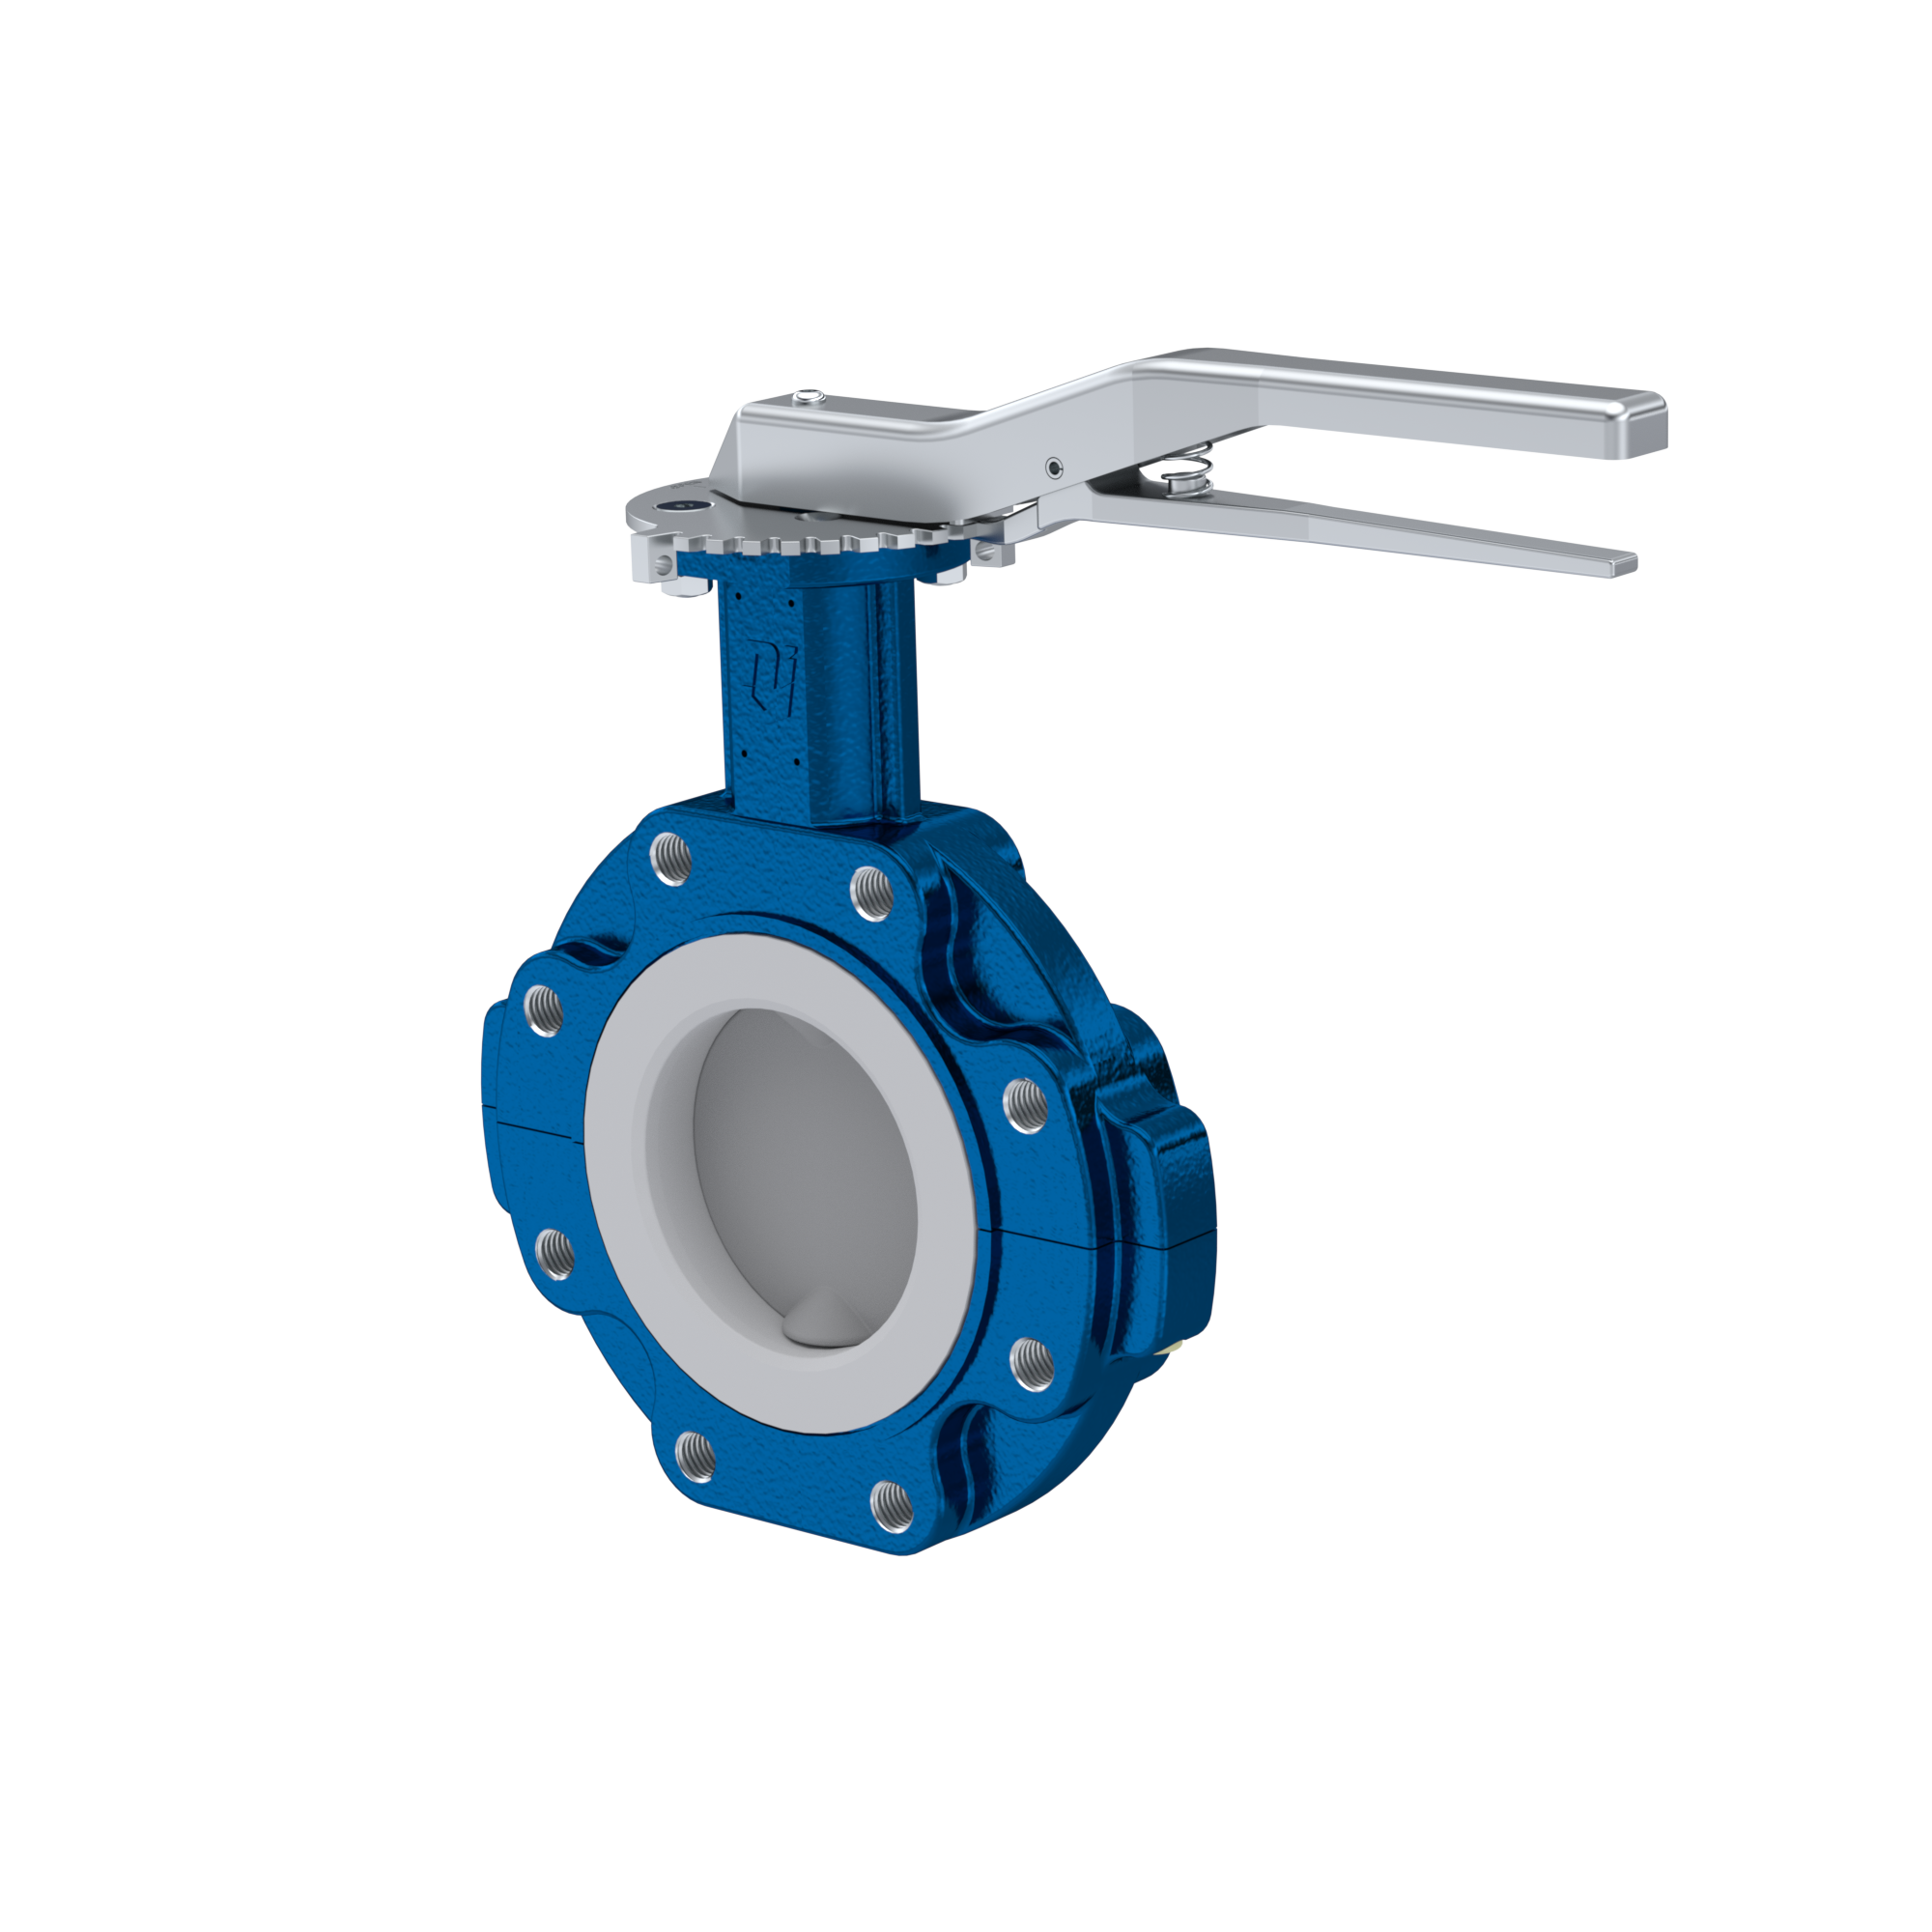 Butterfly-valve PTFE AK10 DN125 ANSI150 lever silicone insert